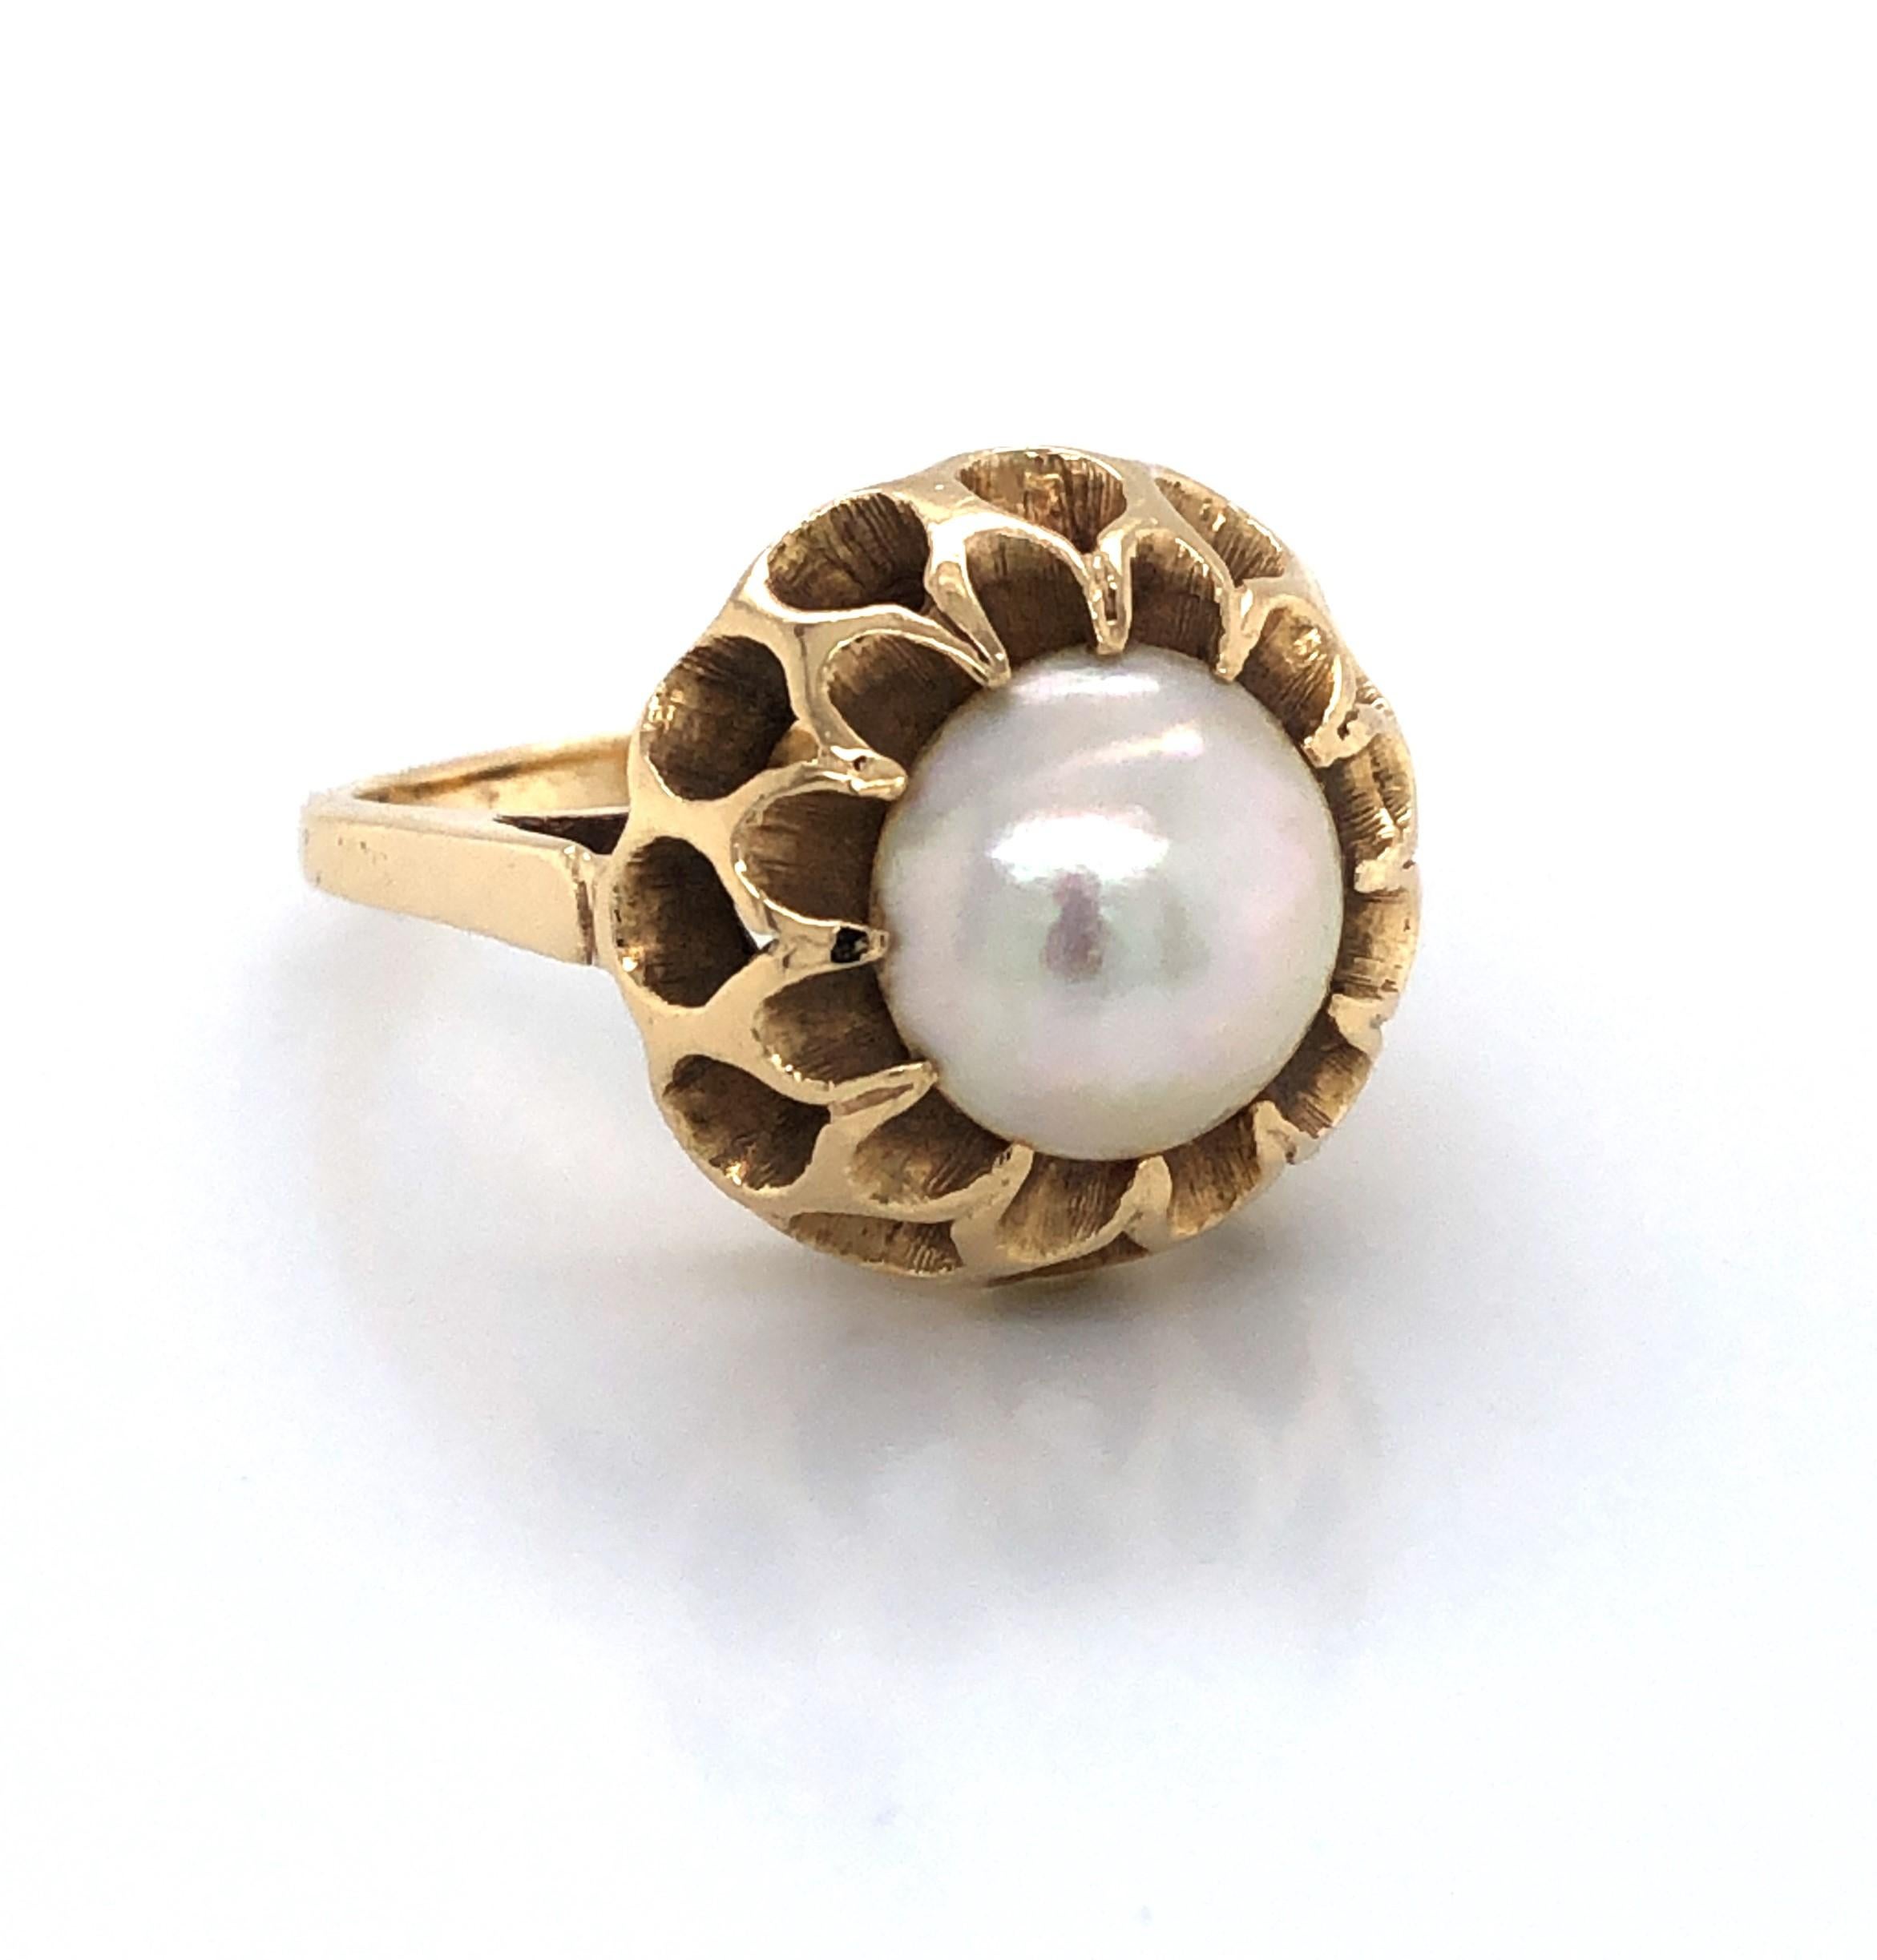 A lacy pattern of bright and satin textures in fourteen karat 14K gold intricately form this floral inspired dome ring. Crowning the bud is a large 10.5 mm iridescent Mabe pearl. The ring head measures approximately 3/4 inch wide, with a 1/4 inch